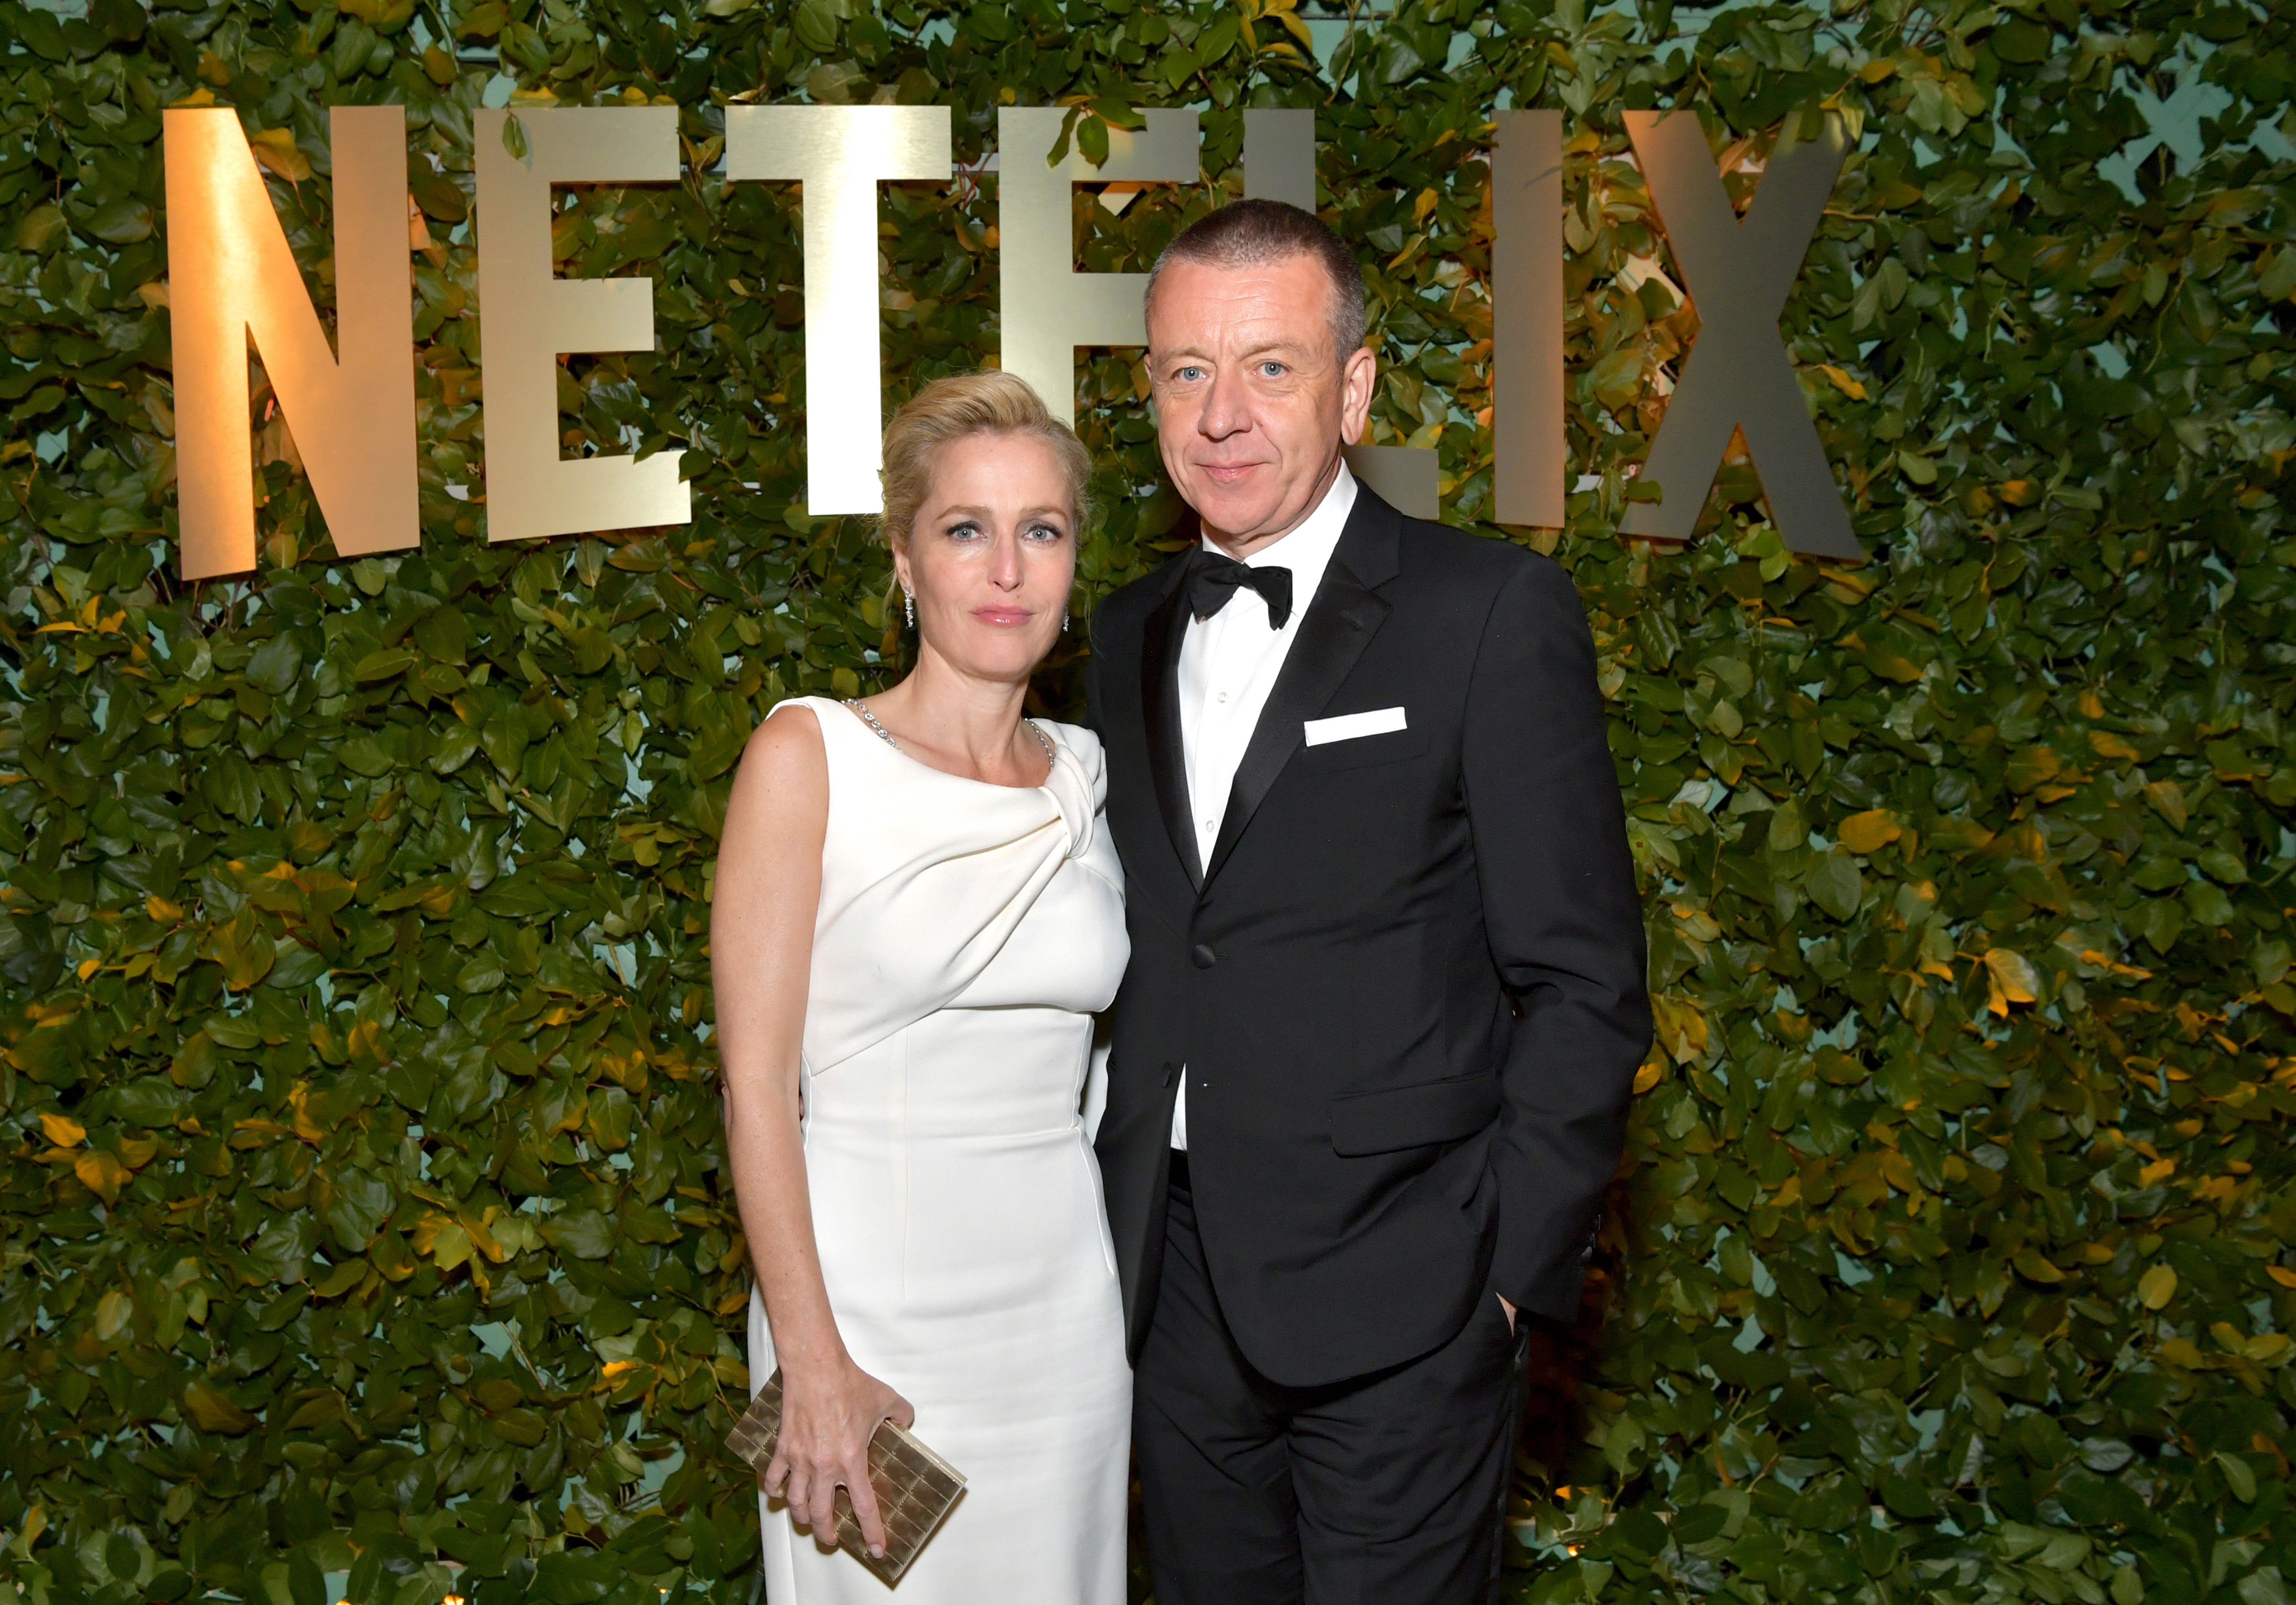 Anderson and Morgan together at the Netflix Golden Globes after party in January 2020